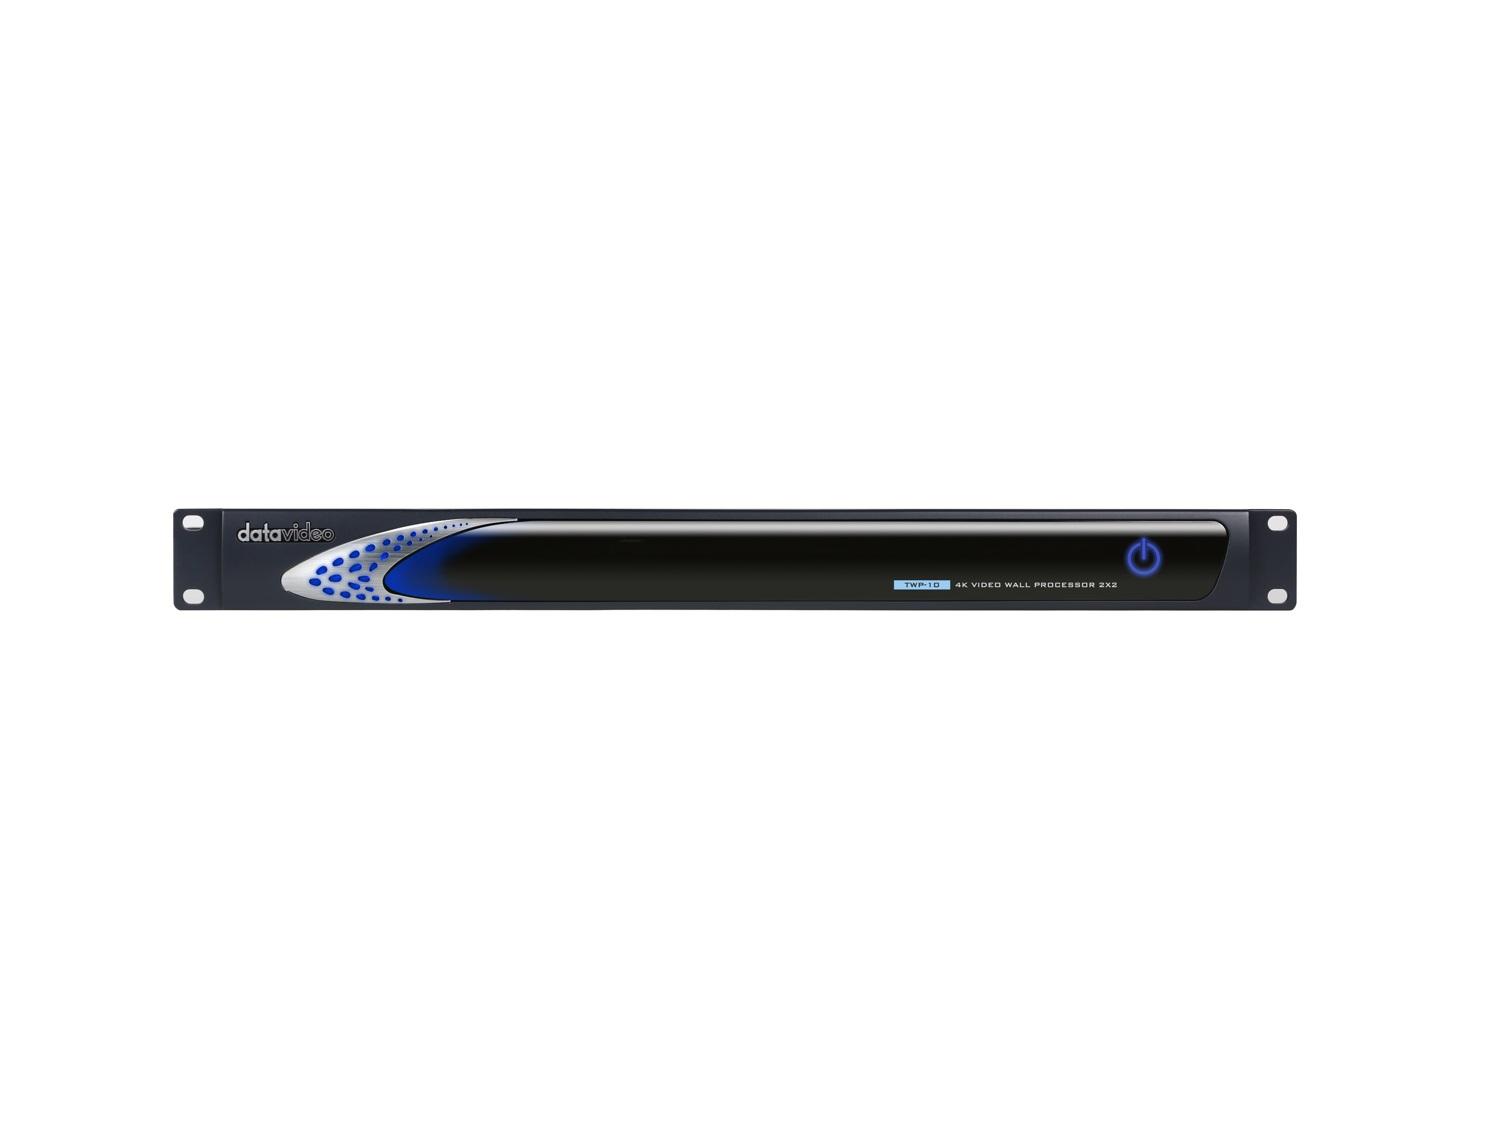 TWP-10 4K 2x2 Video Wall Processor/1 HDMI input/4 HDMI outputs by Datavideo